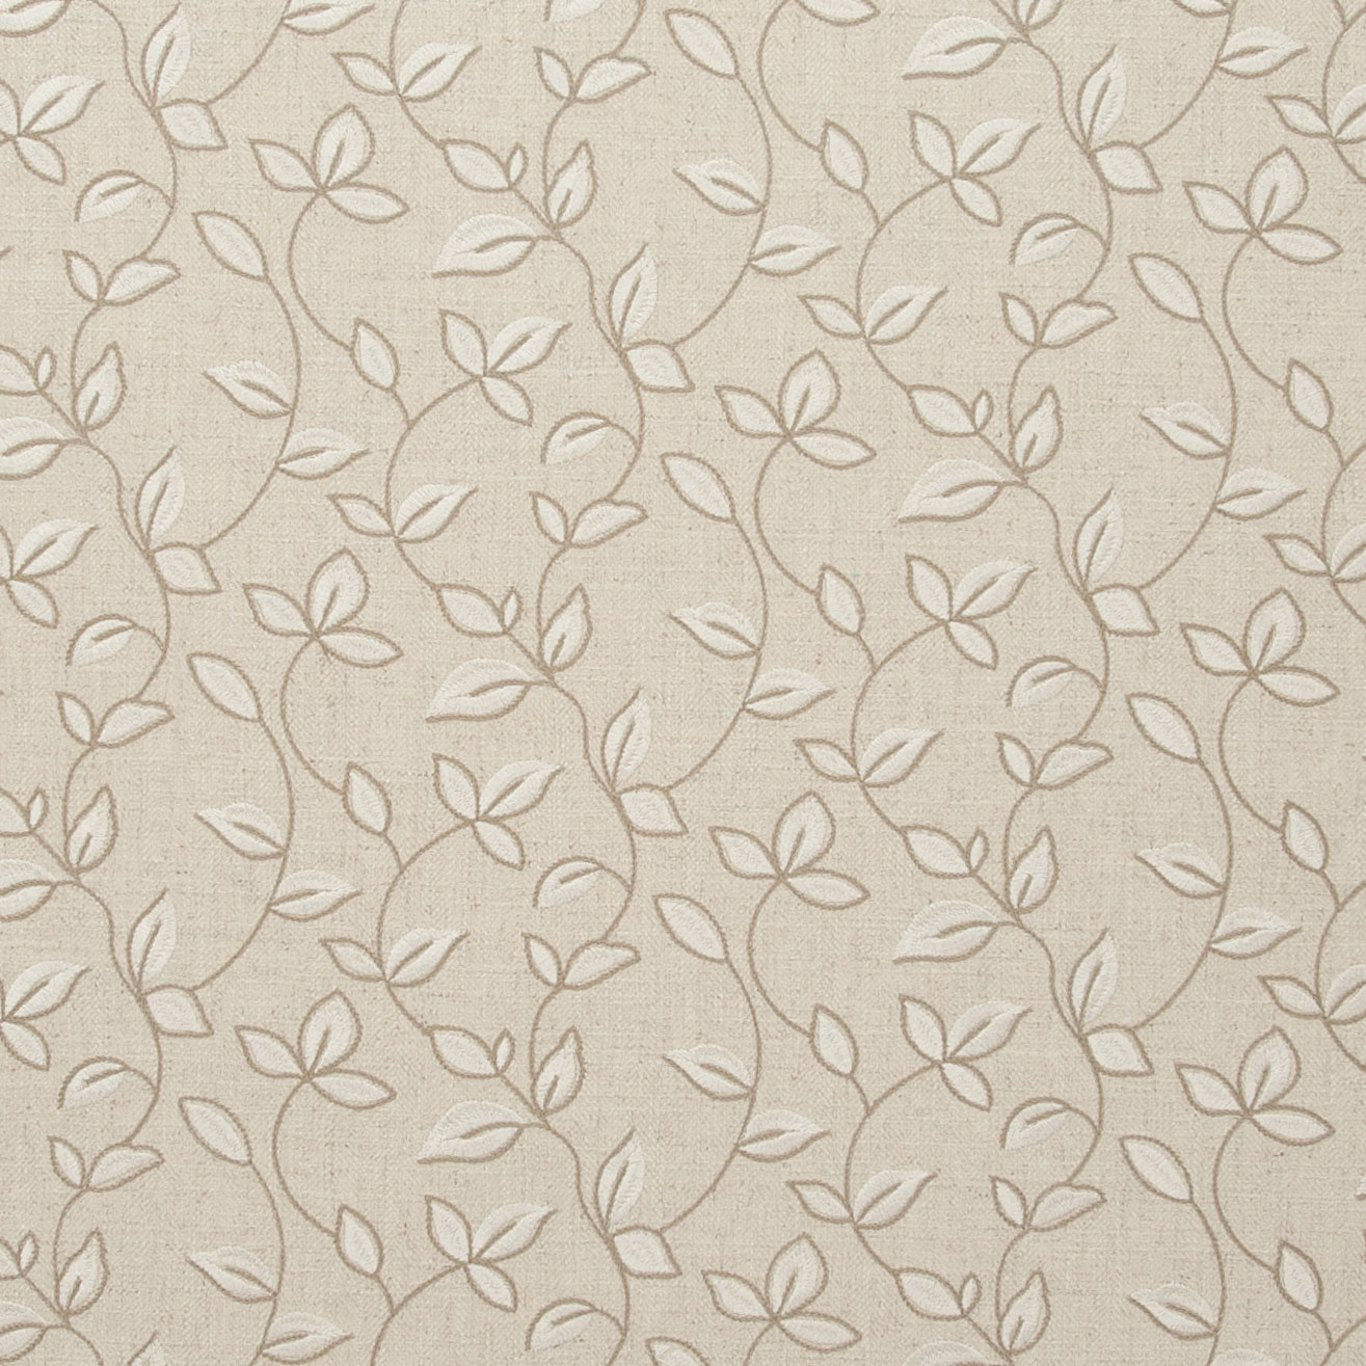 Chartwell Fabric by Clarke & Clarke - F0734/04 - Natural